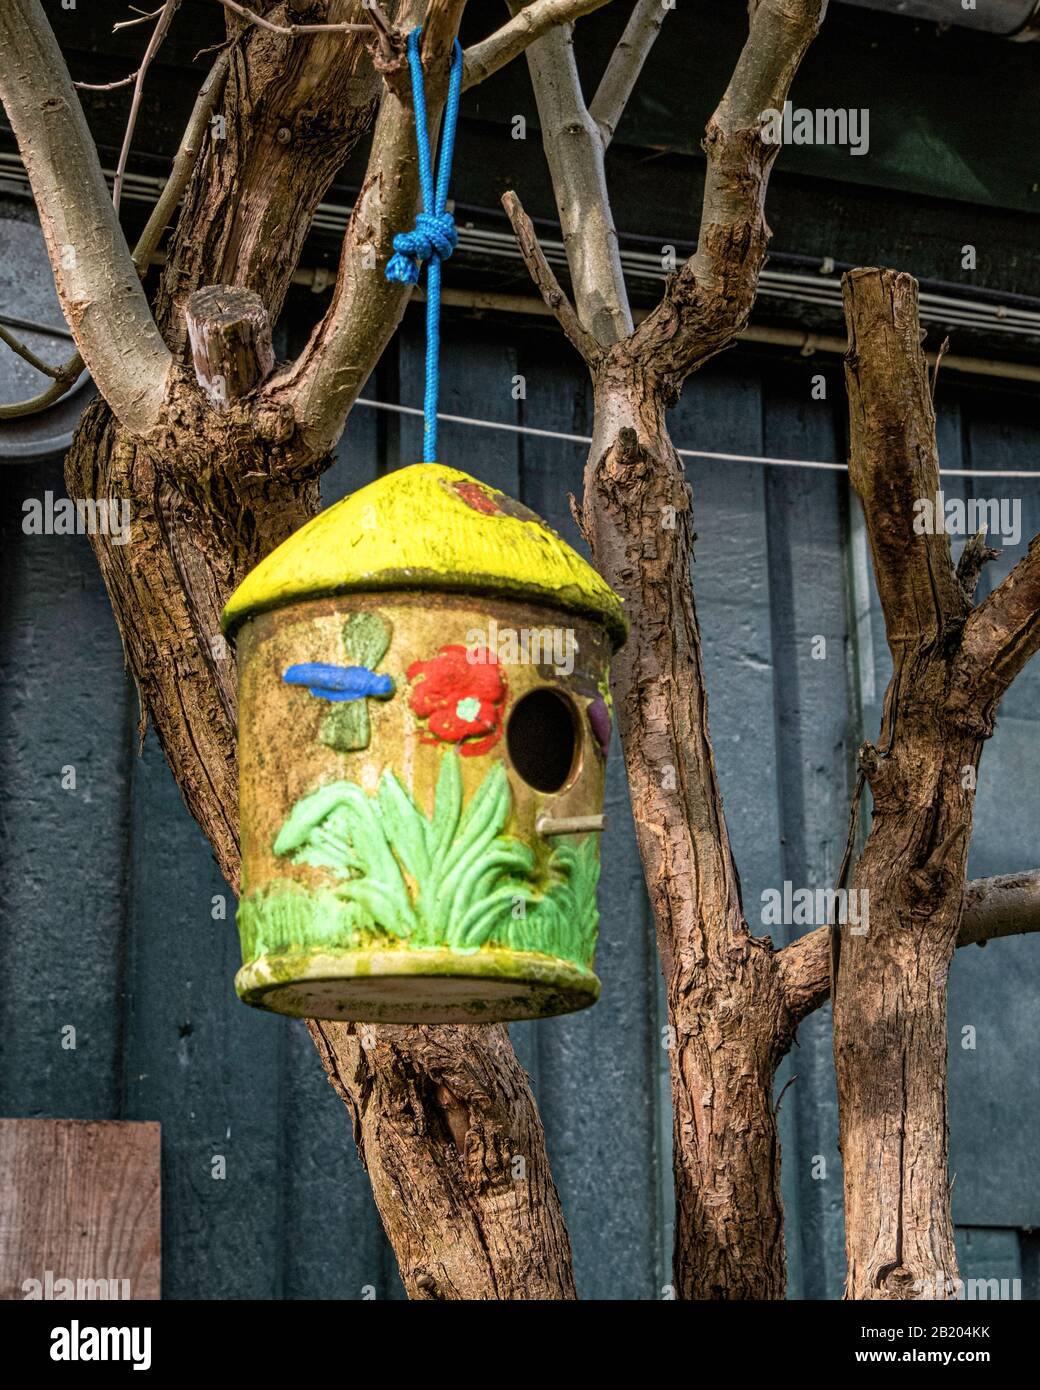 Bird Nesting box outside House in Freetown Christiania,a hippie community and commune established by squatters in Copenhagen, Denmark Stock Photo